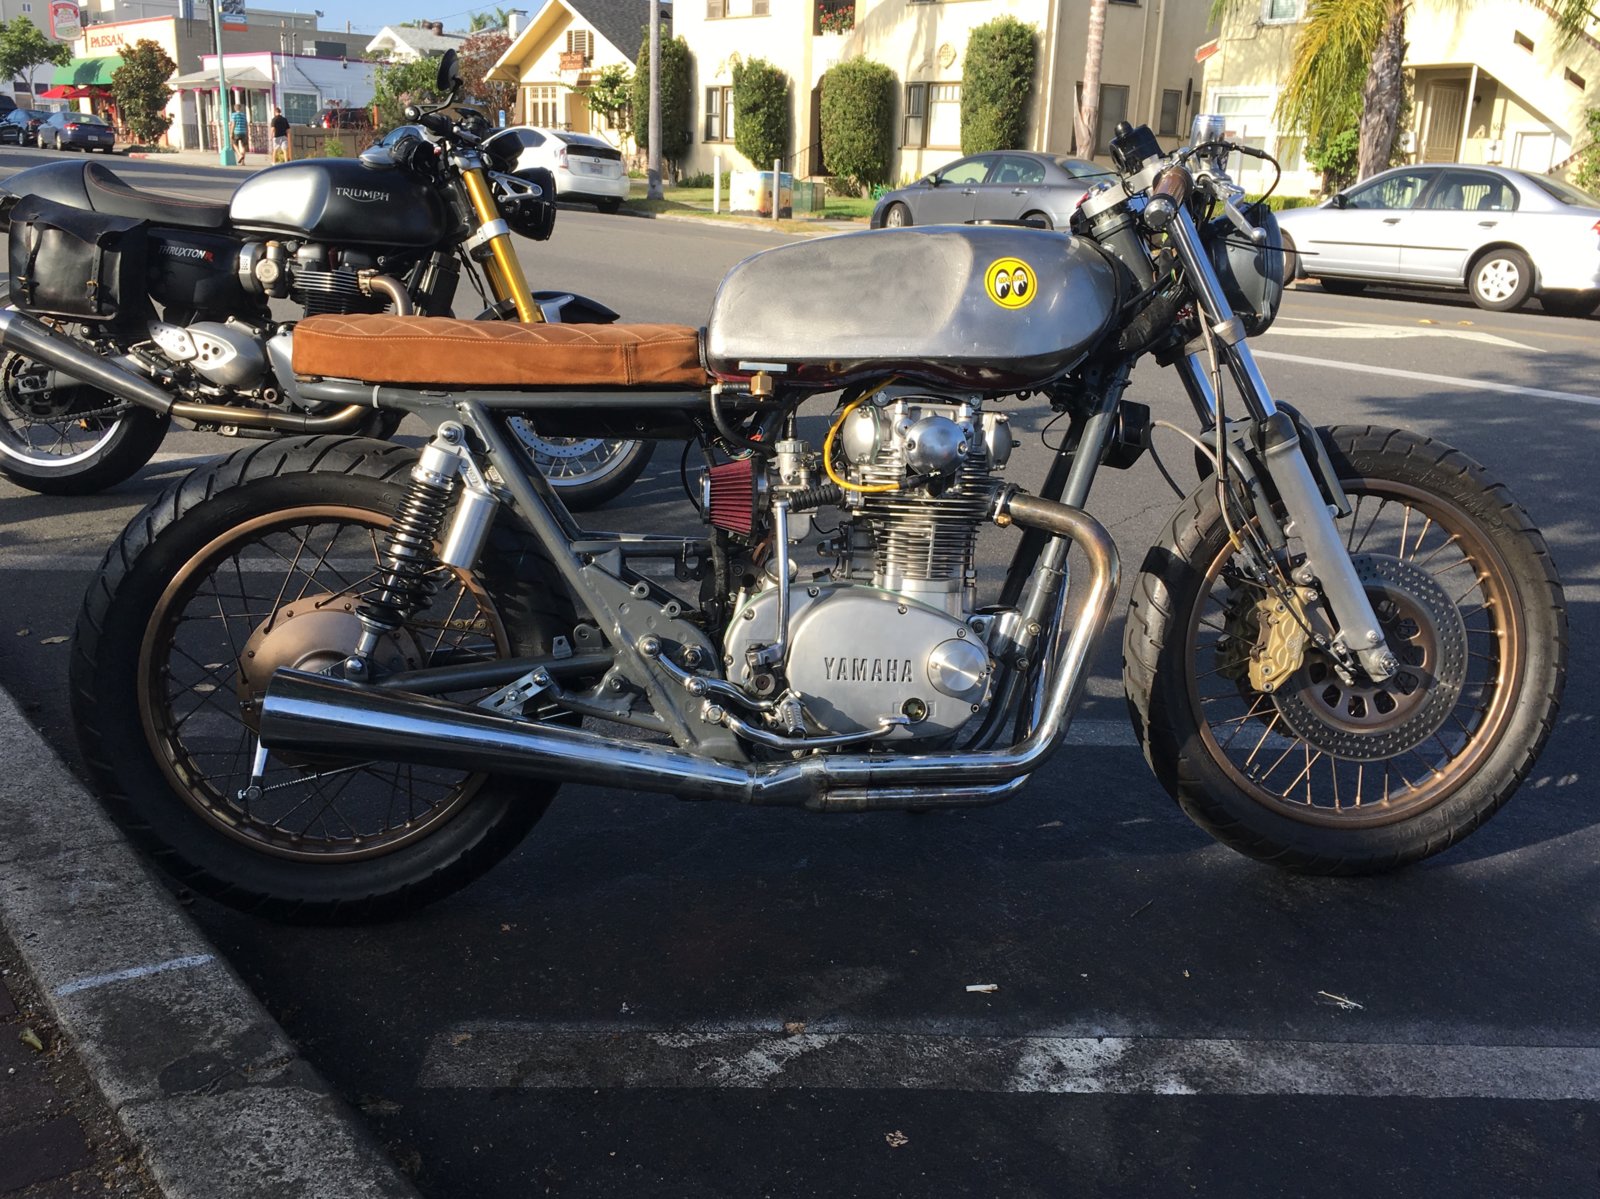 XS650 'Virgin' after final rebuild before new paint